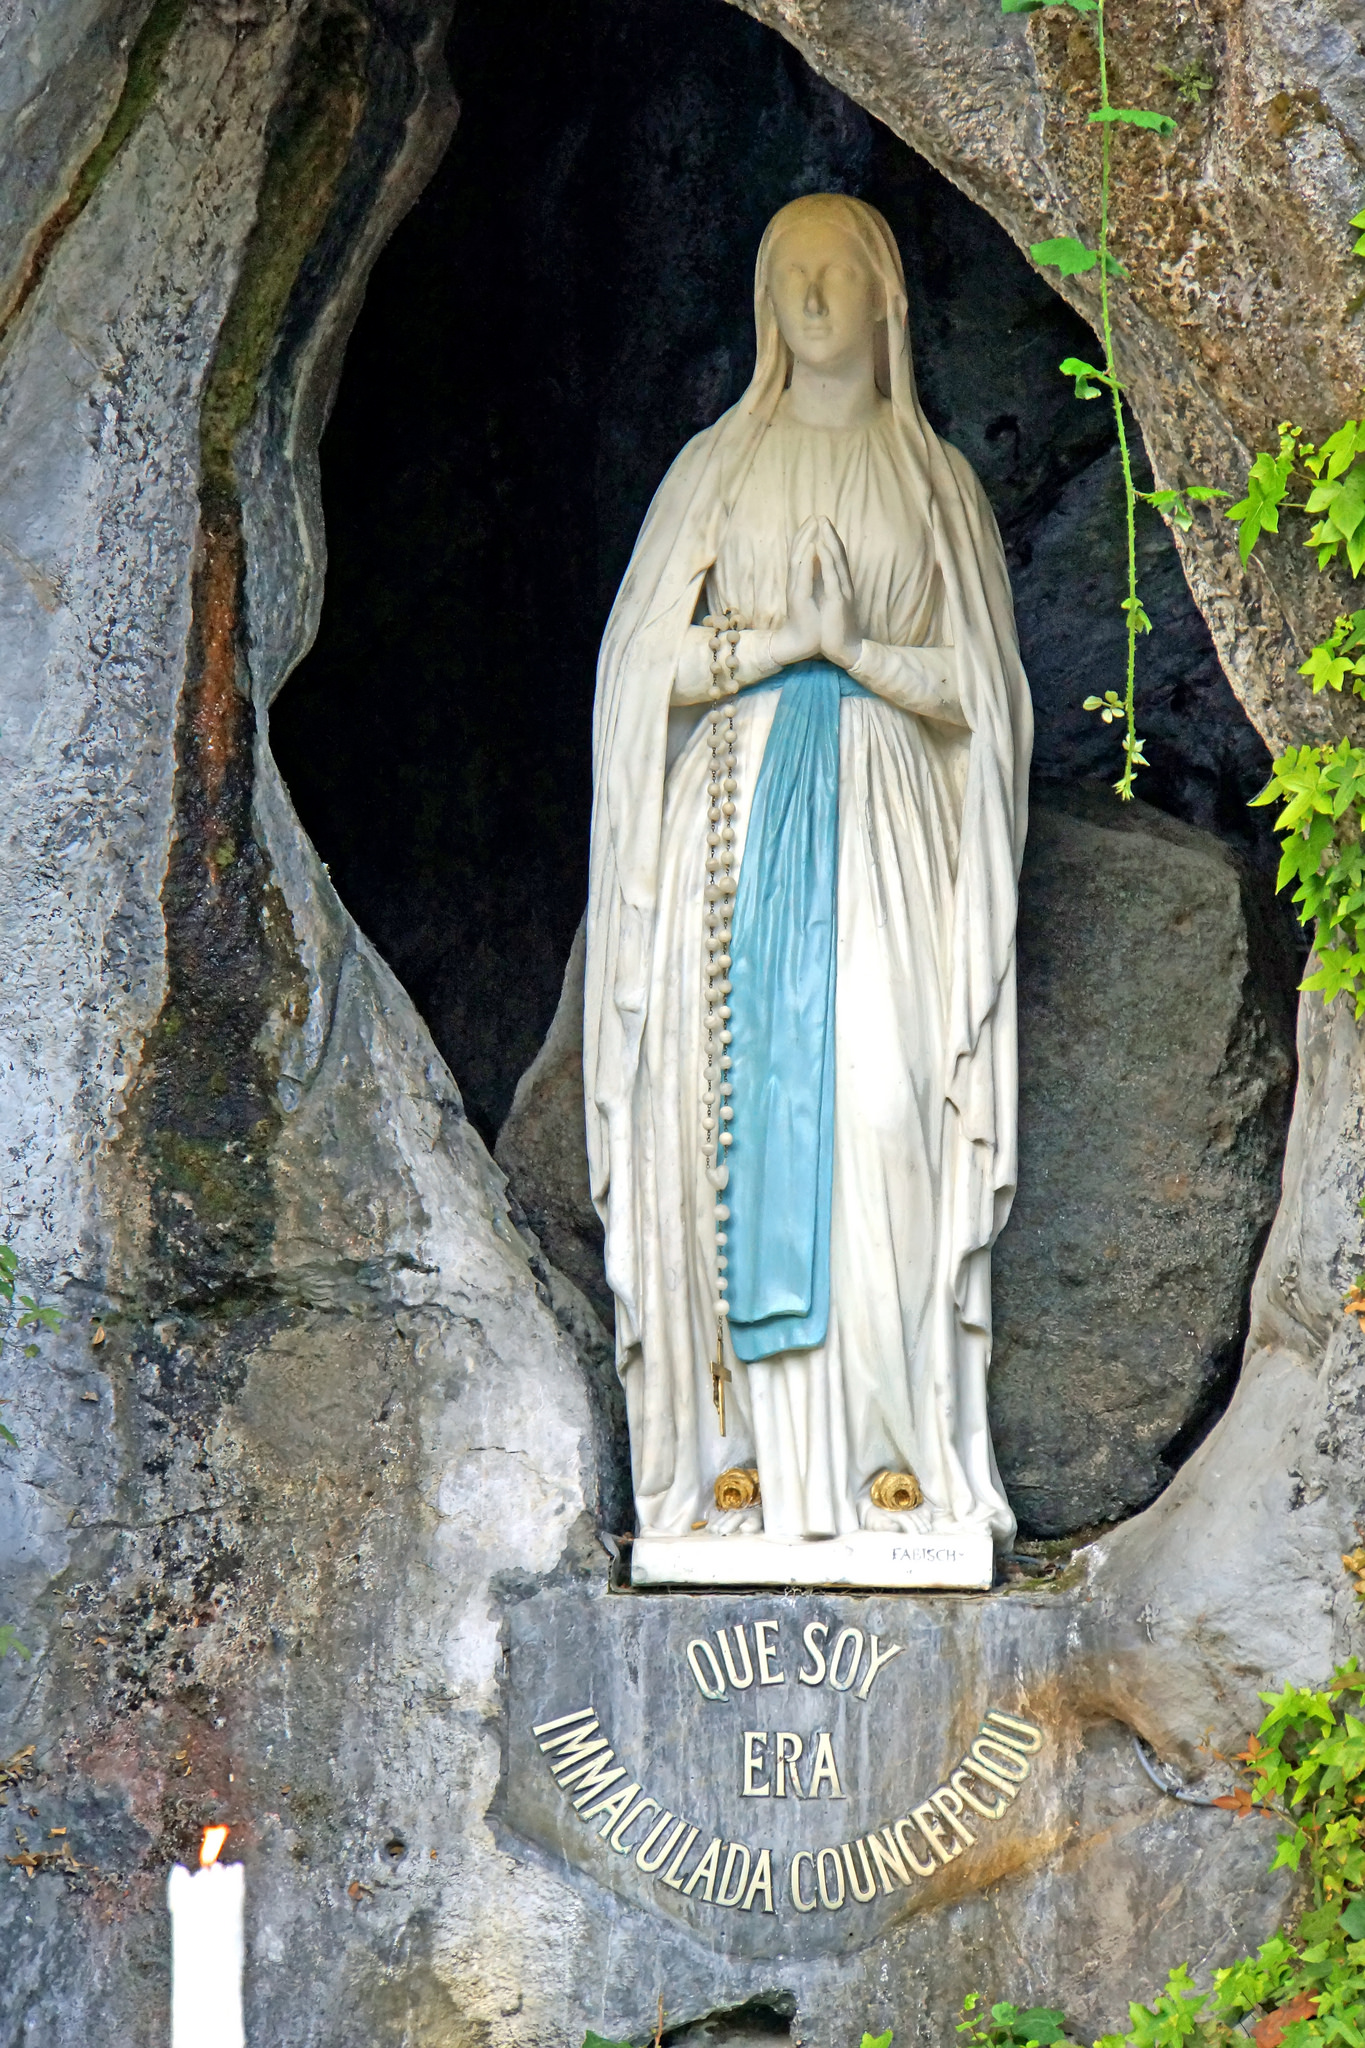 10 Things To Do And See In Lourdes, France